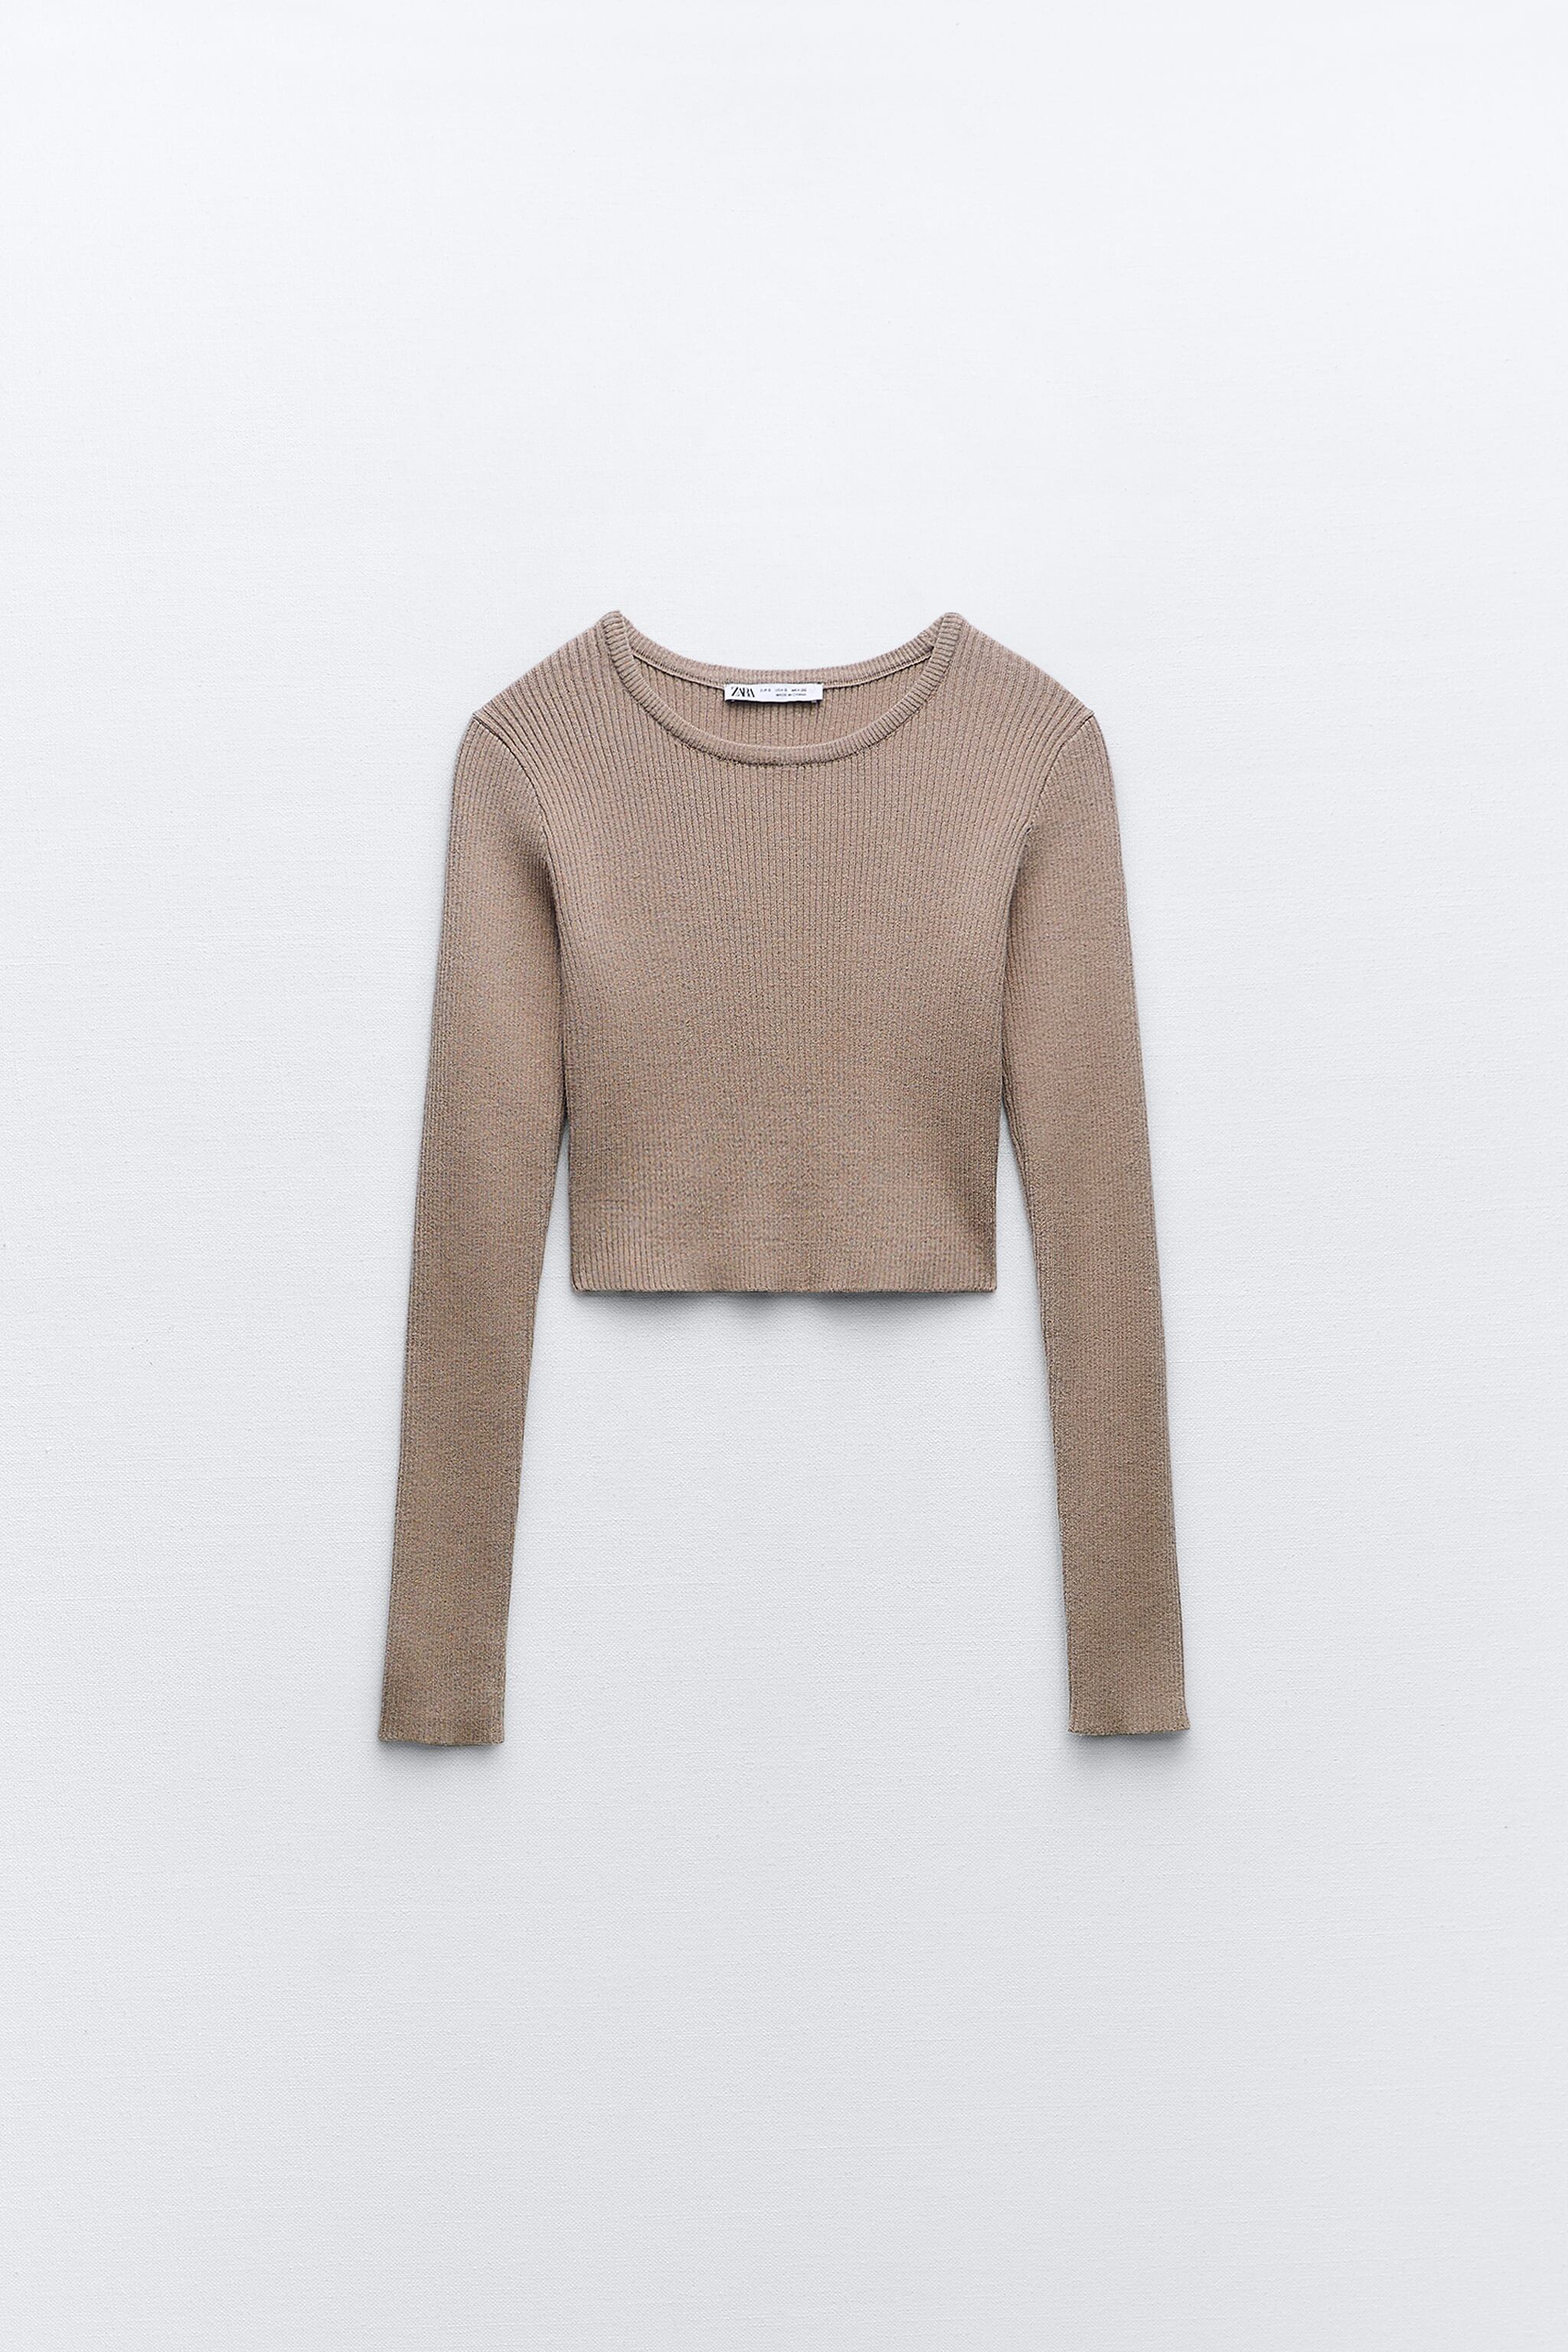 SOFT TOUCH CROP RIB SWEATER